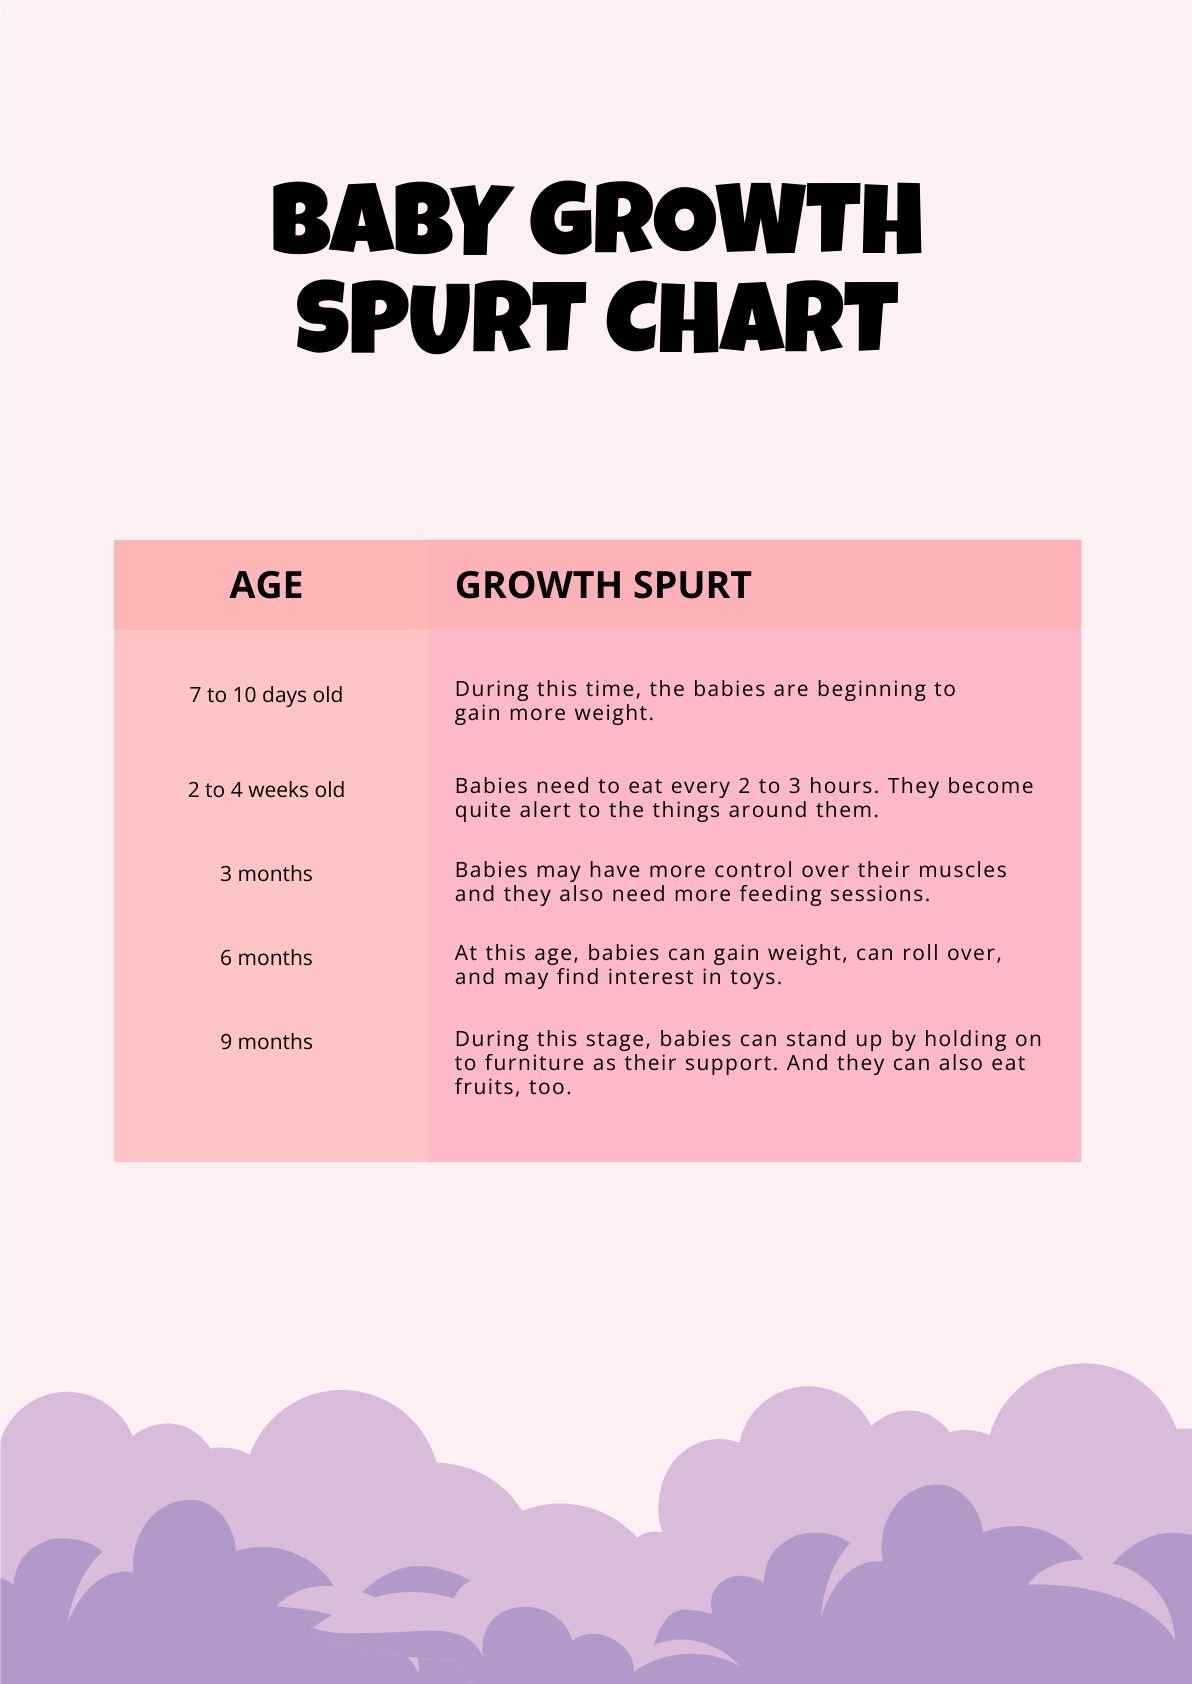 Baby Growth Spurt Chart in PDF